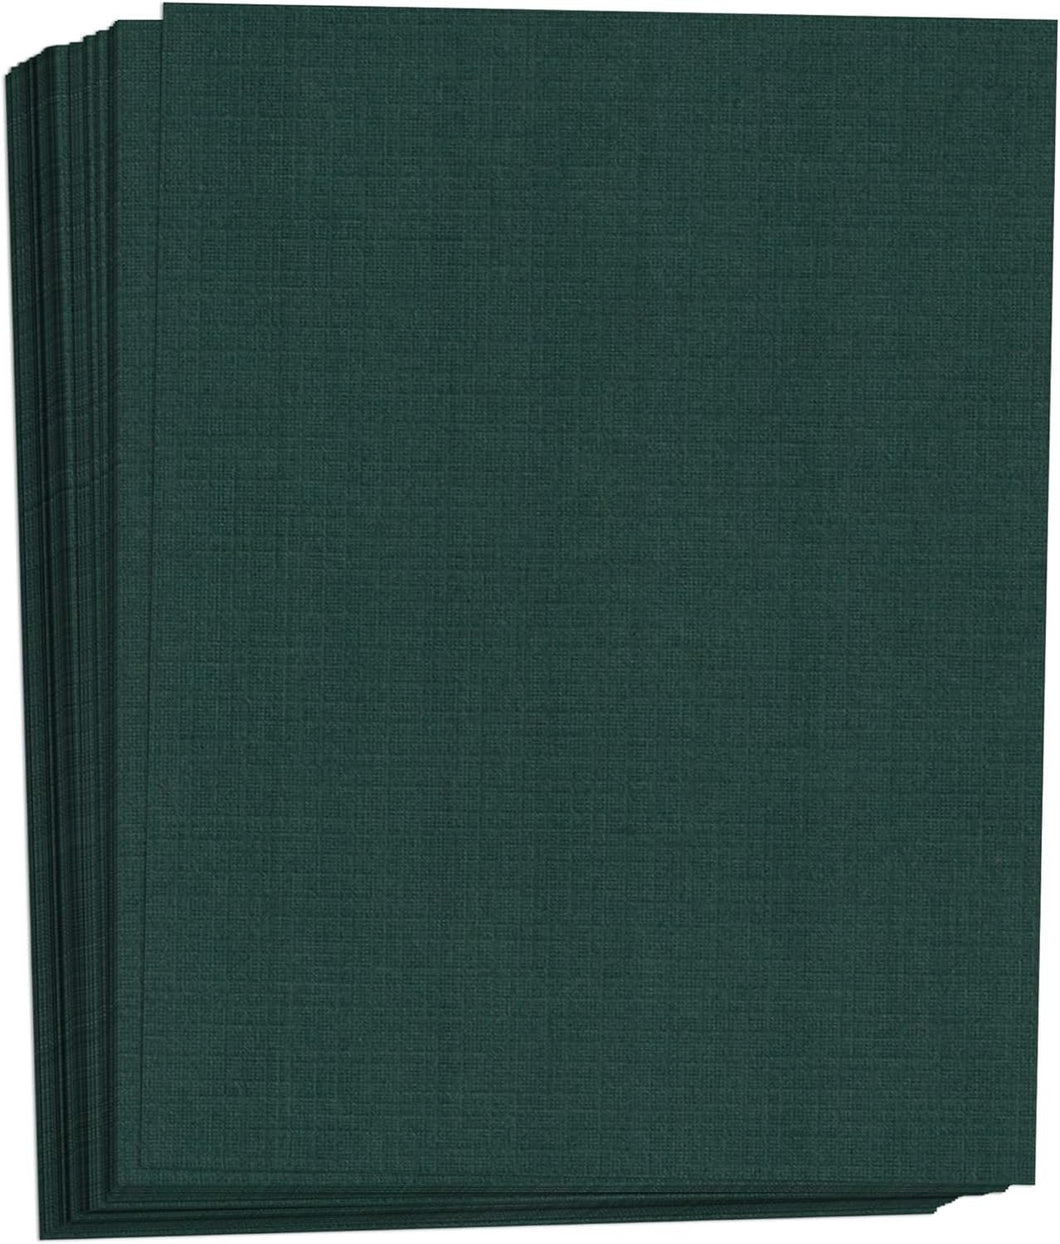 Hamilco Green Linen Textured Cardstock Thick Paper - 11 x 17